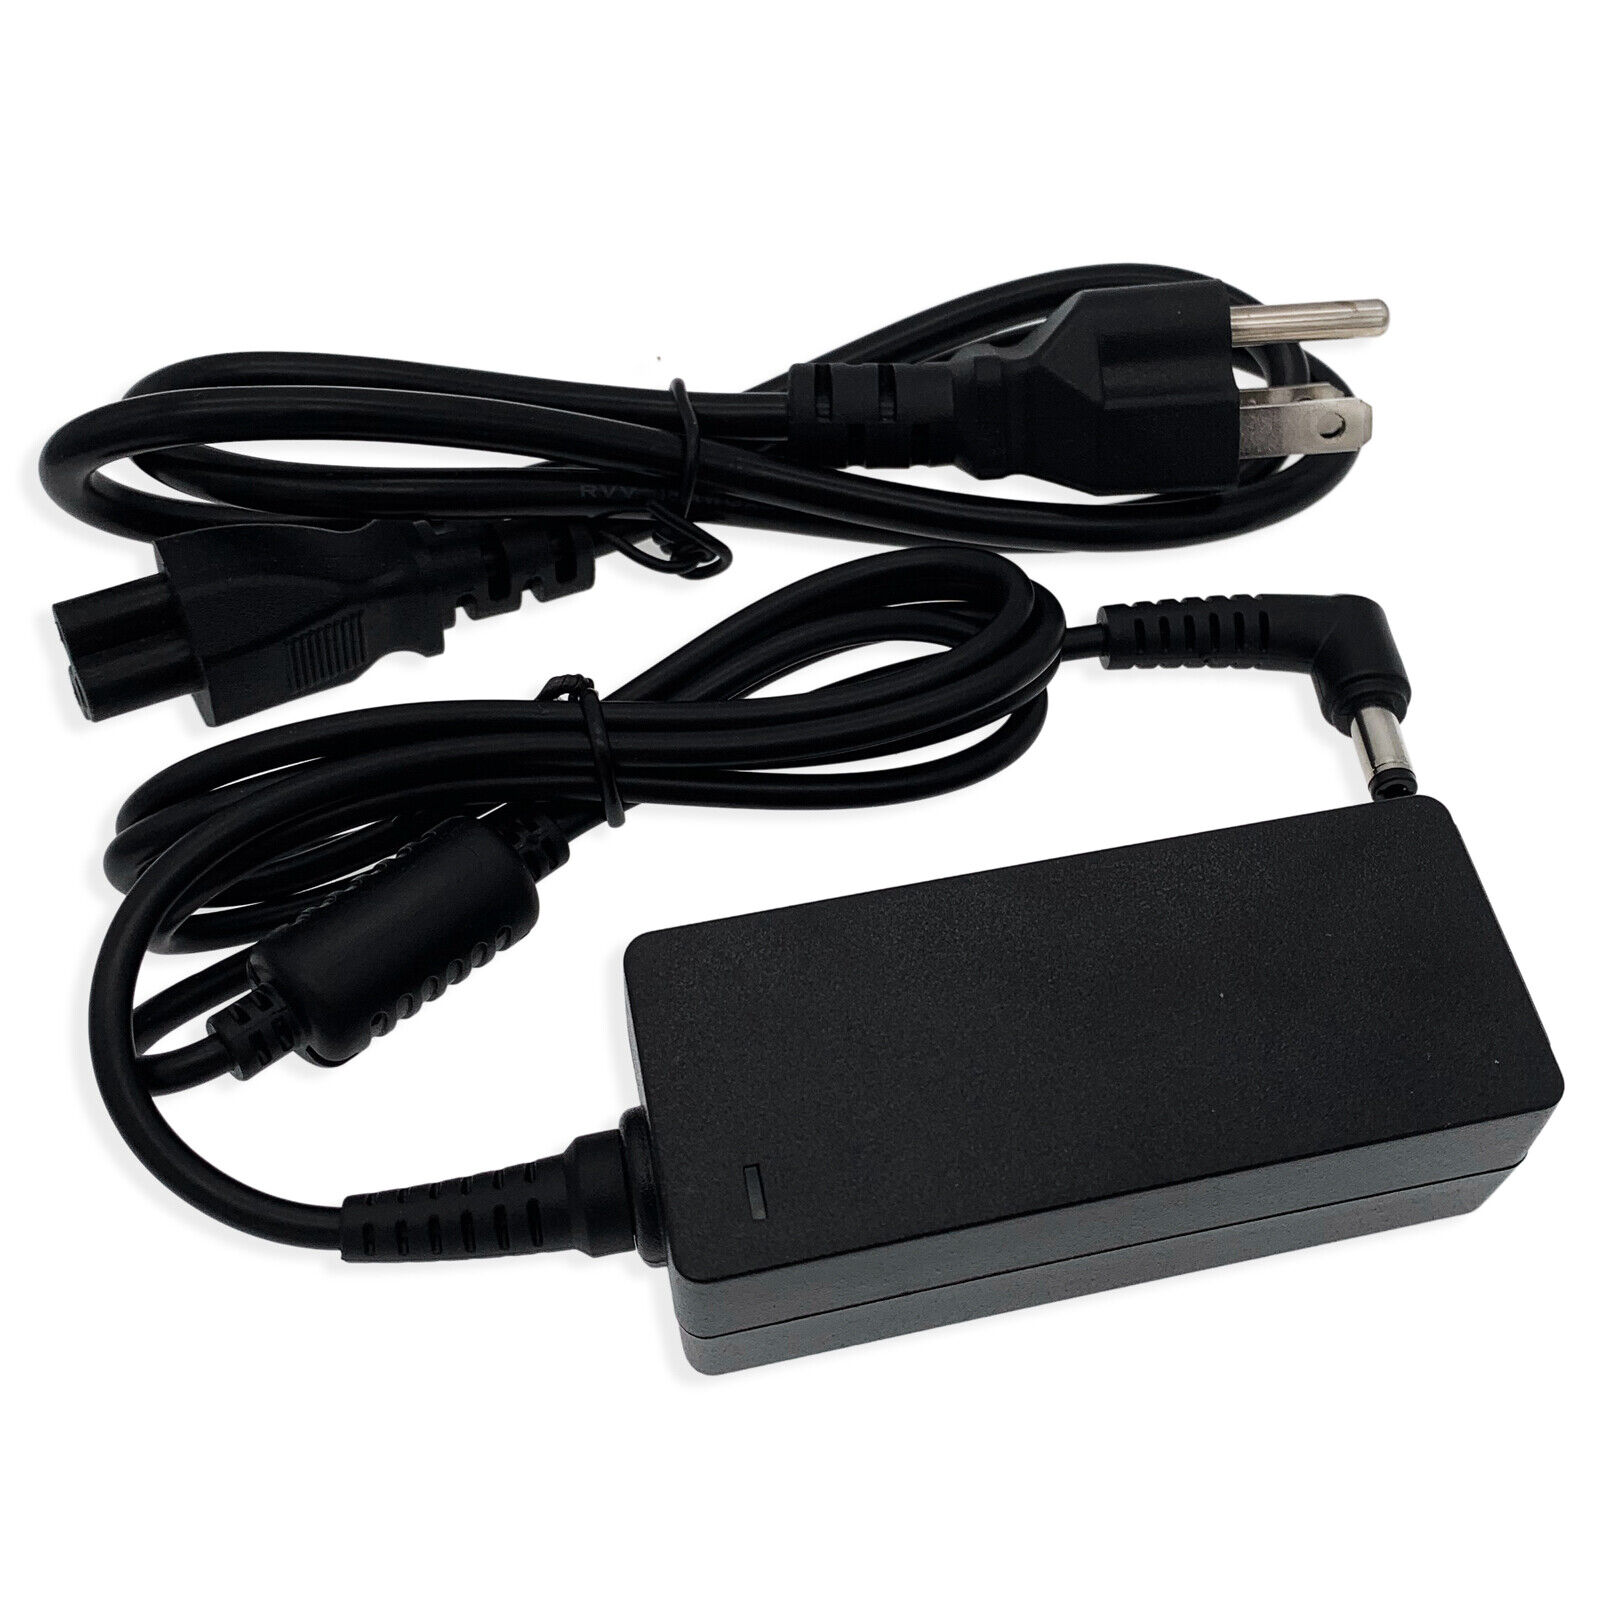 New AC Adapter For CA-560 Canon OPTURA ZR10 ZR20 ZR40 ZR45MC Camera Power Supply To Fit Camcorder, Camera Compatible B